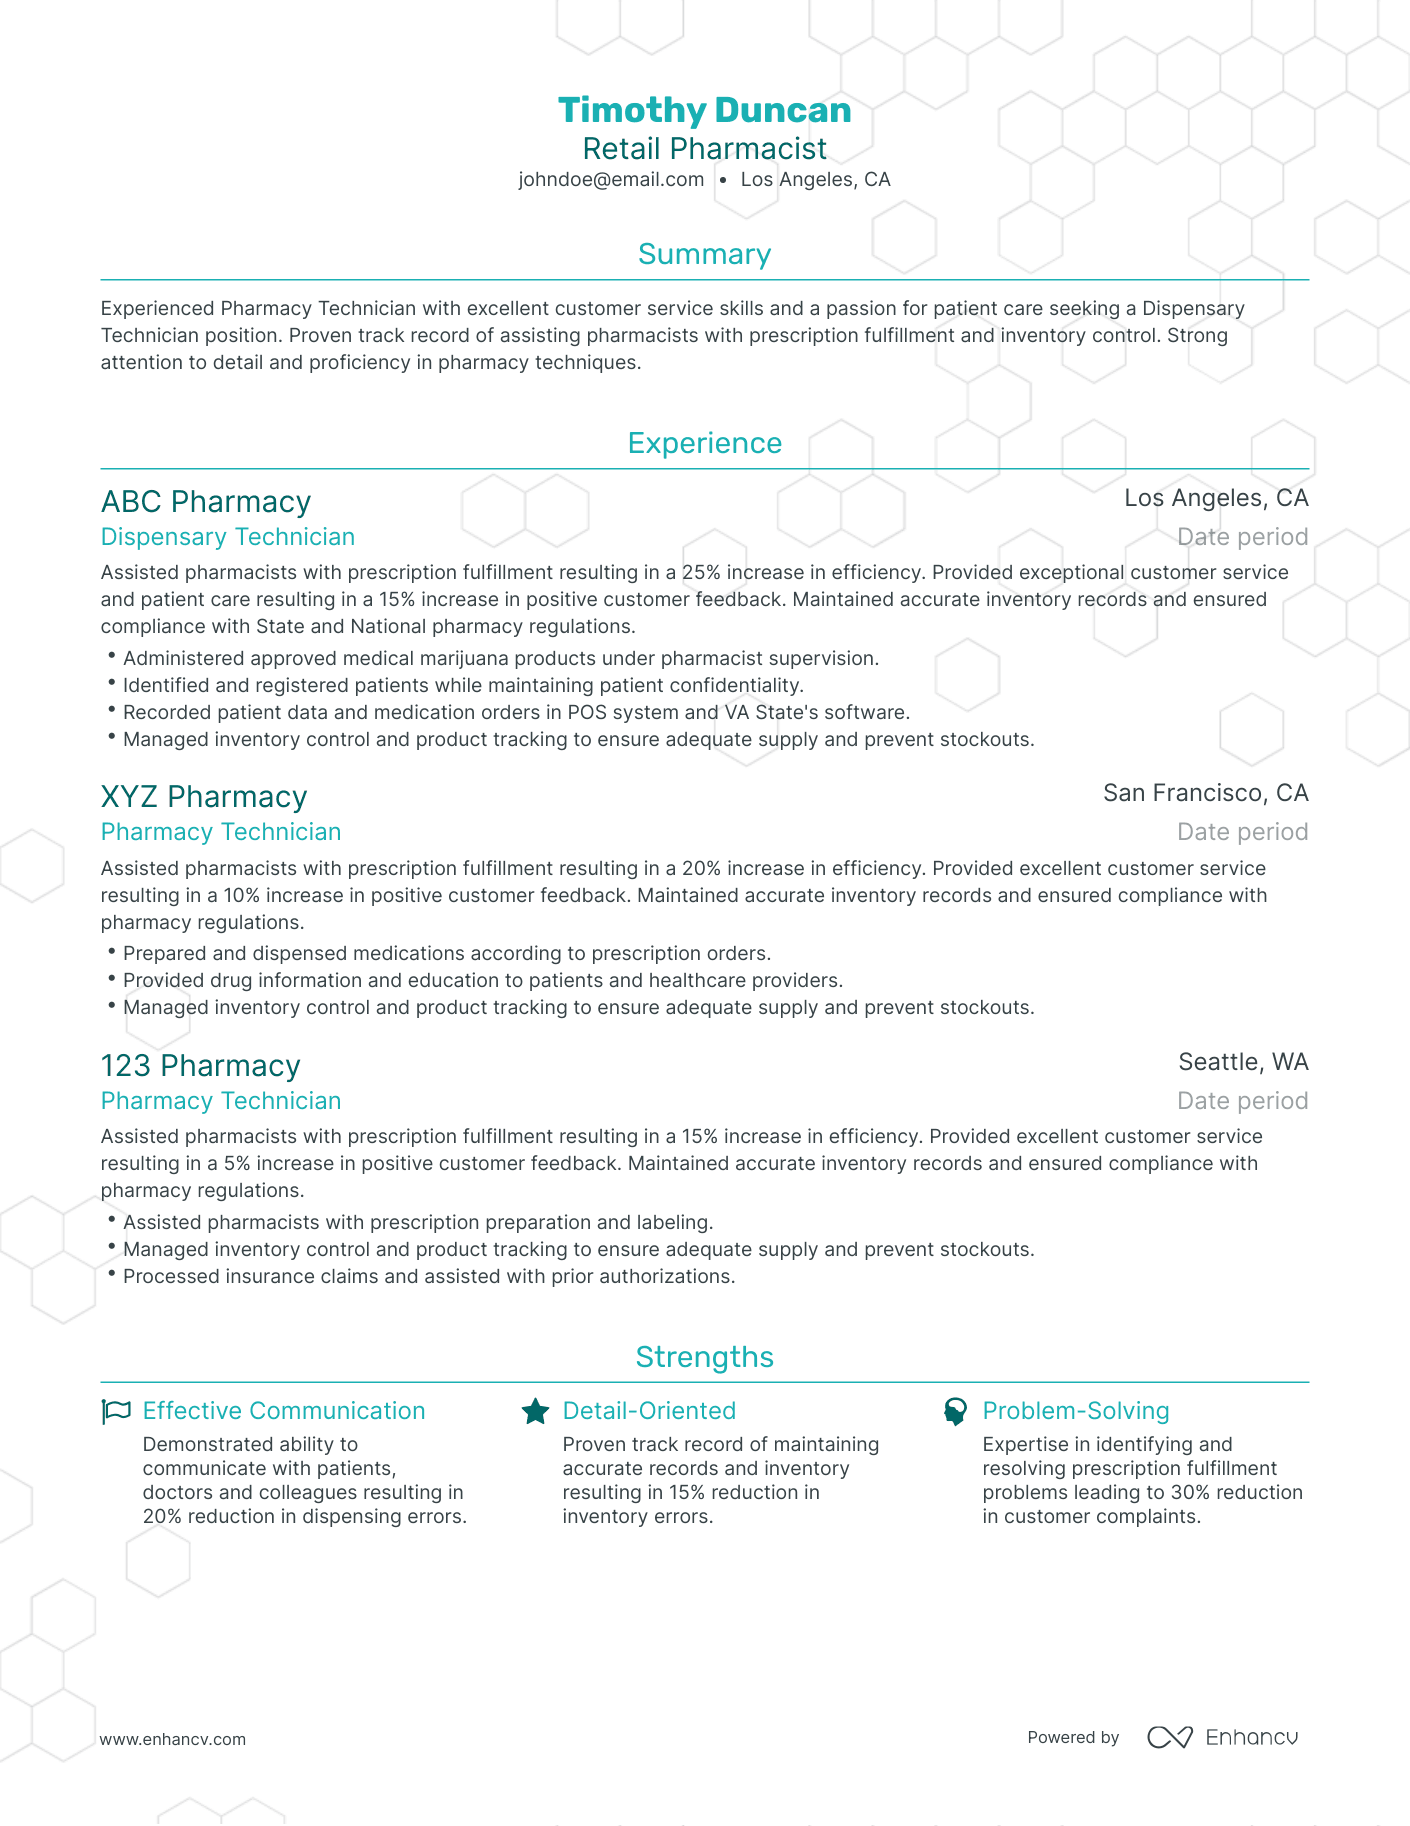 Traditional Retail Pharmacist Resume Template